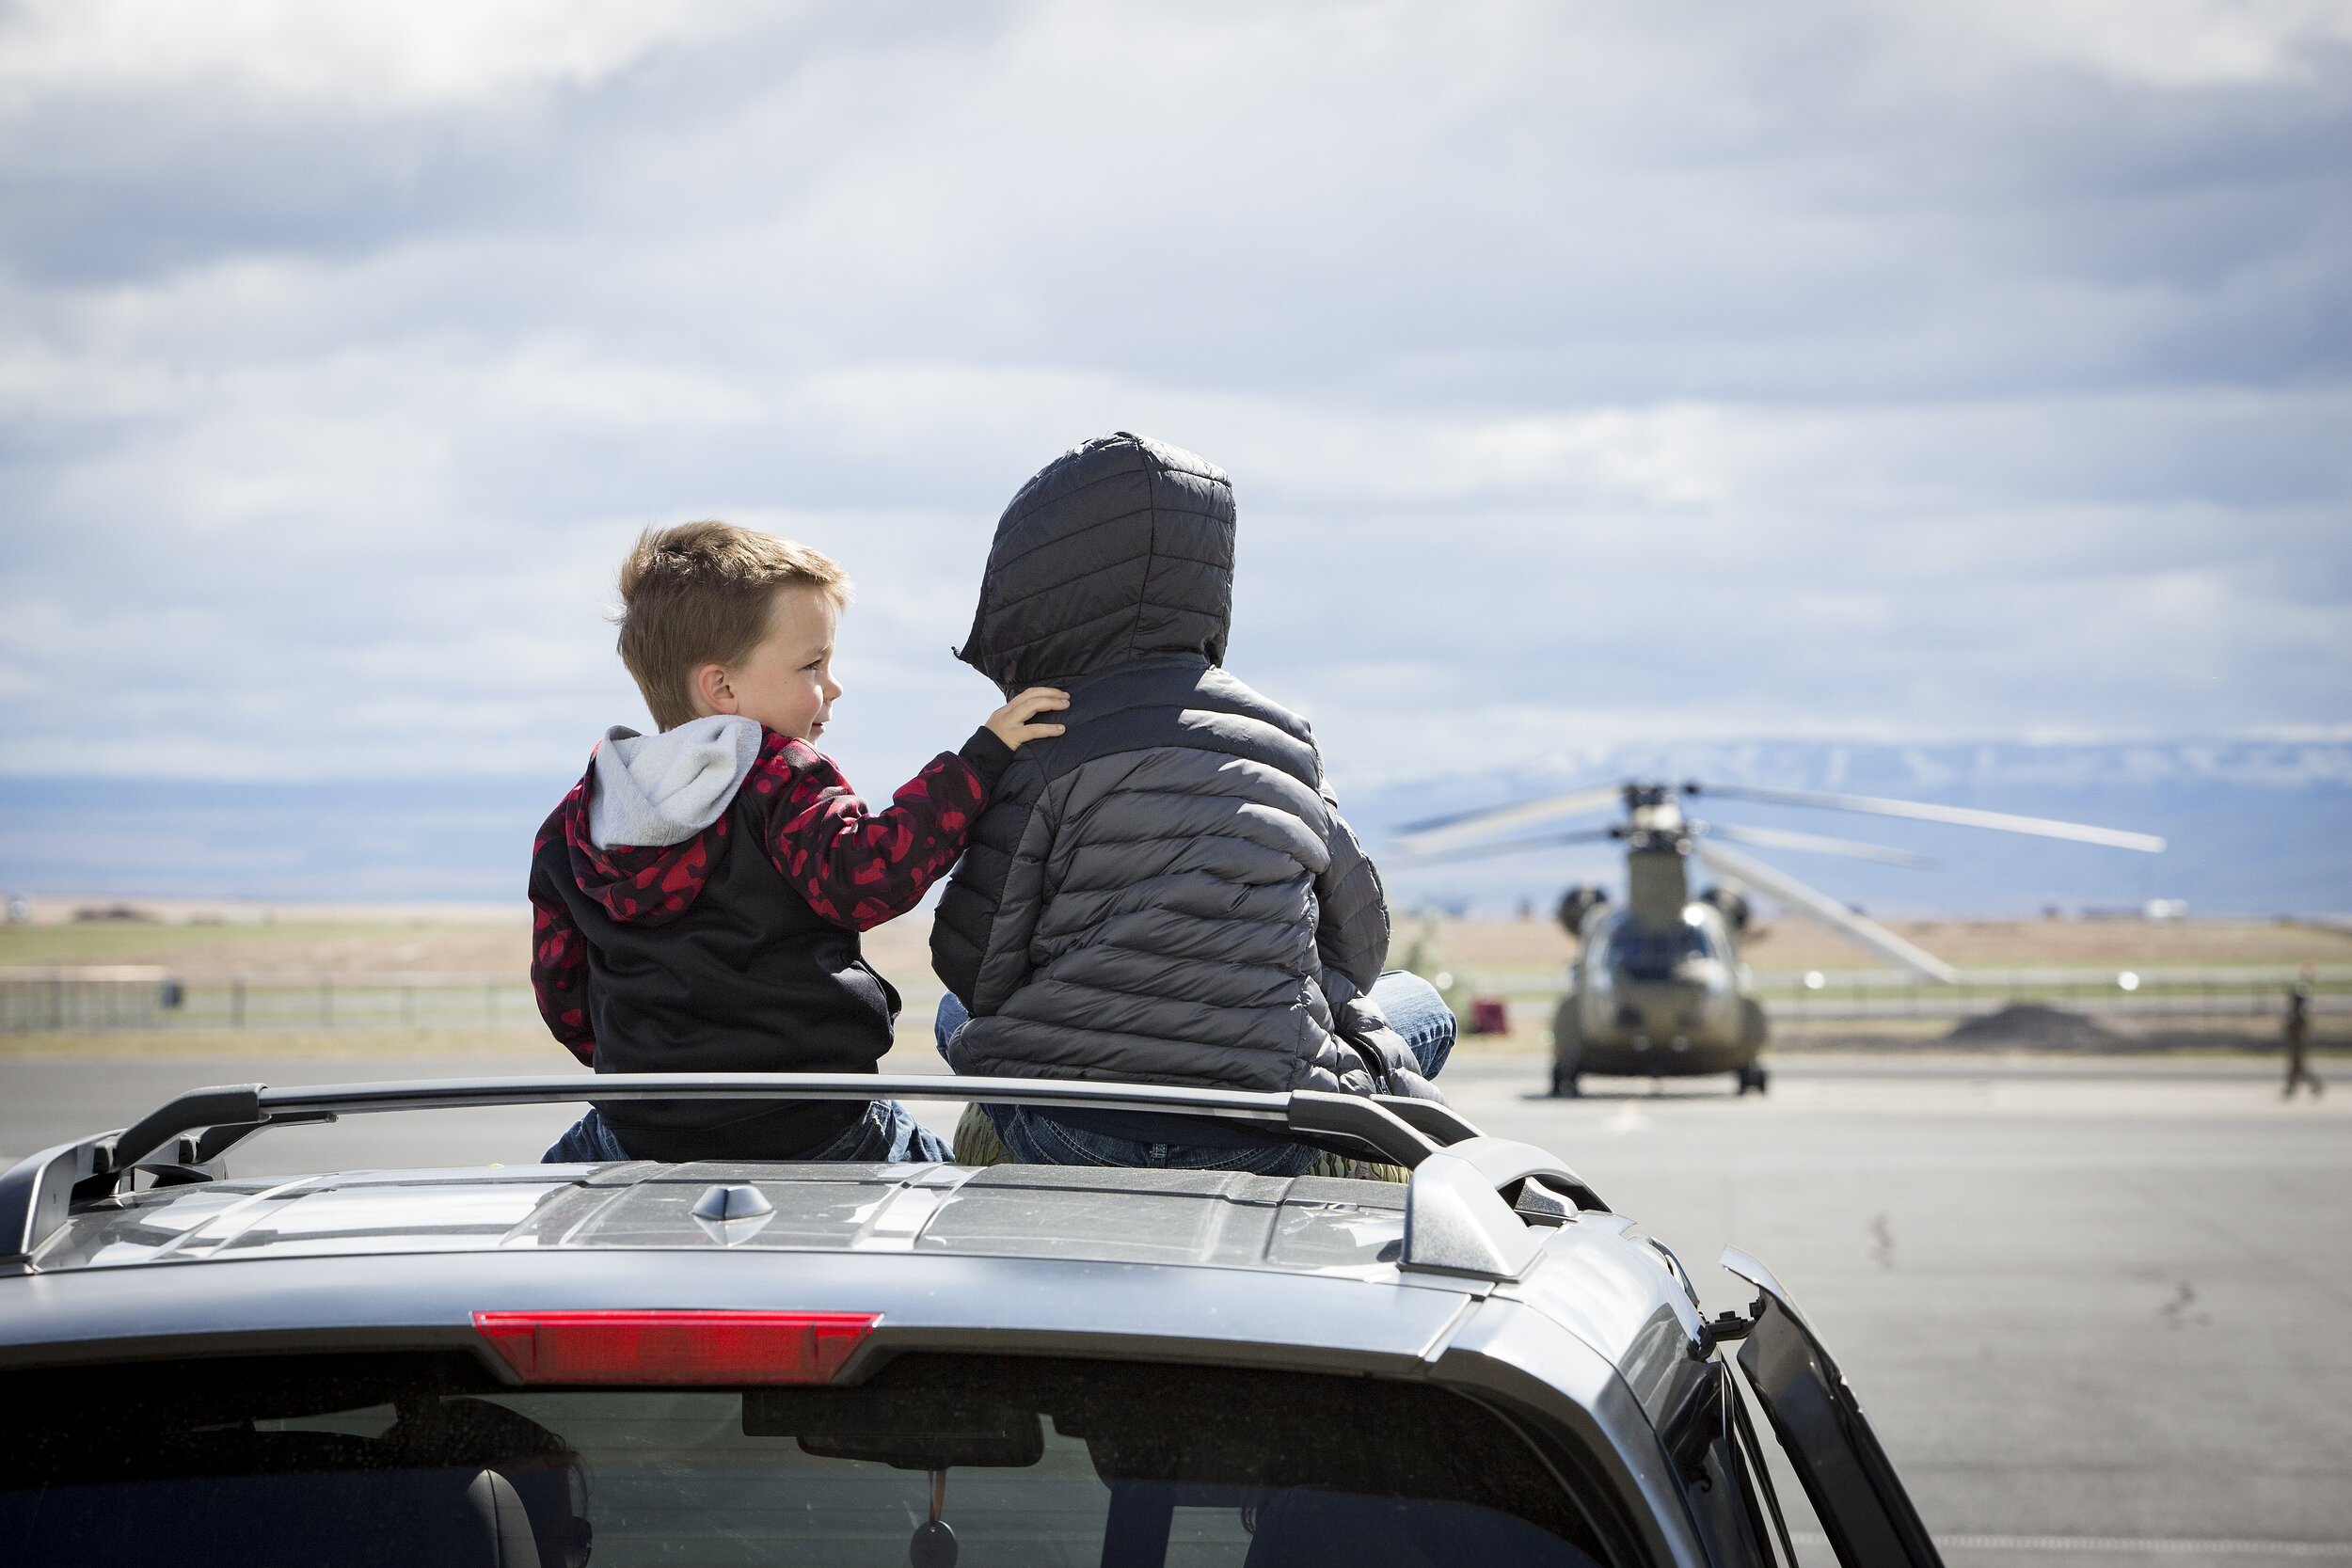  Kasen, left, and Teagan Prine share a moment while sitting on the roof of their mother's car Wednesday, May 6, 2020, at the Oregon Army National Guard Aviation Support Facility in Pendleton. The Prine's father, Staff Sgt. Jeff Prine, was among the d